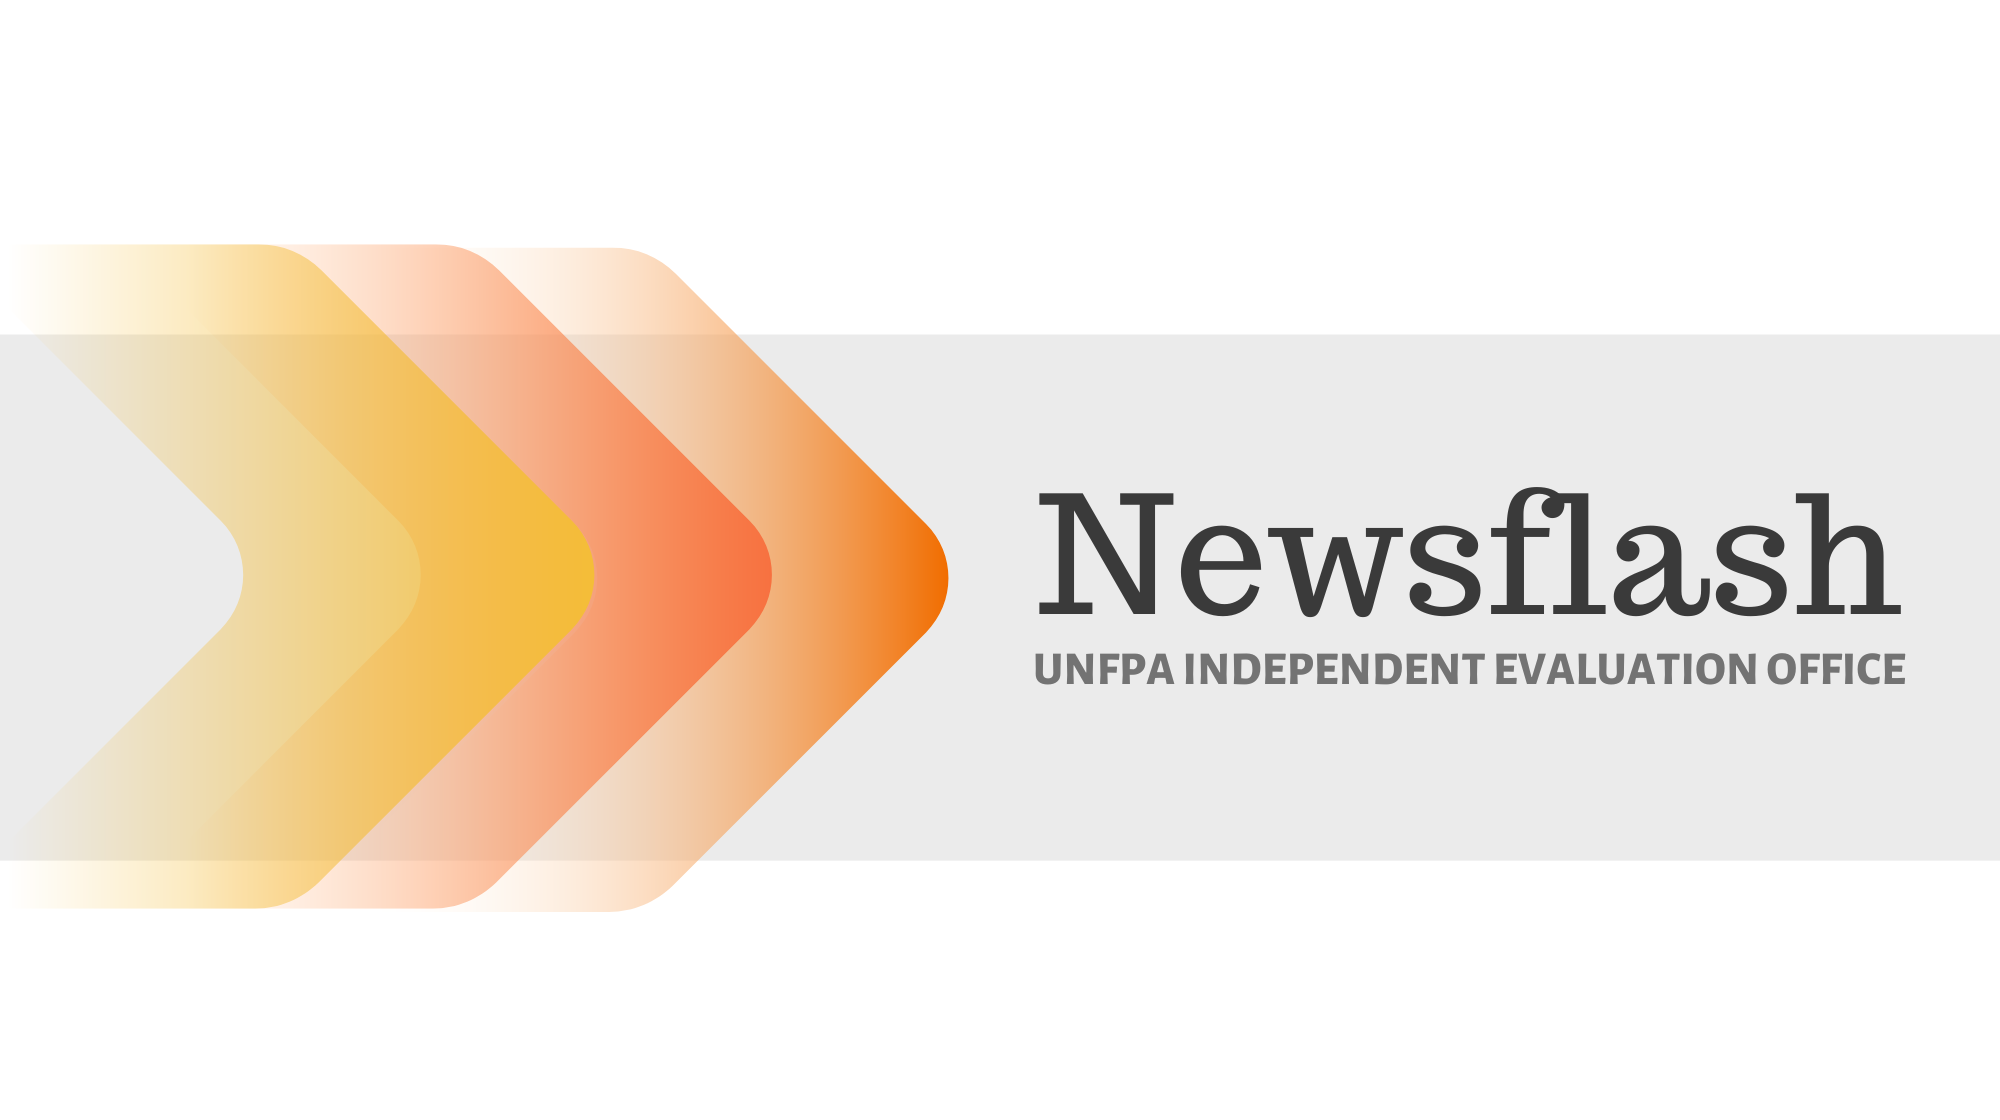 Newsflash from UNFPA Independent Evaluation Office